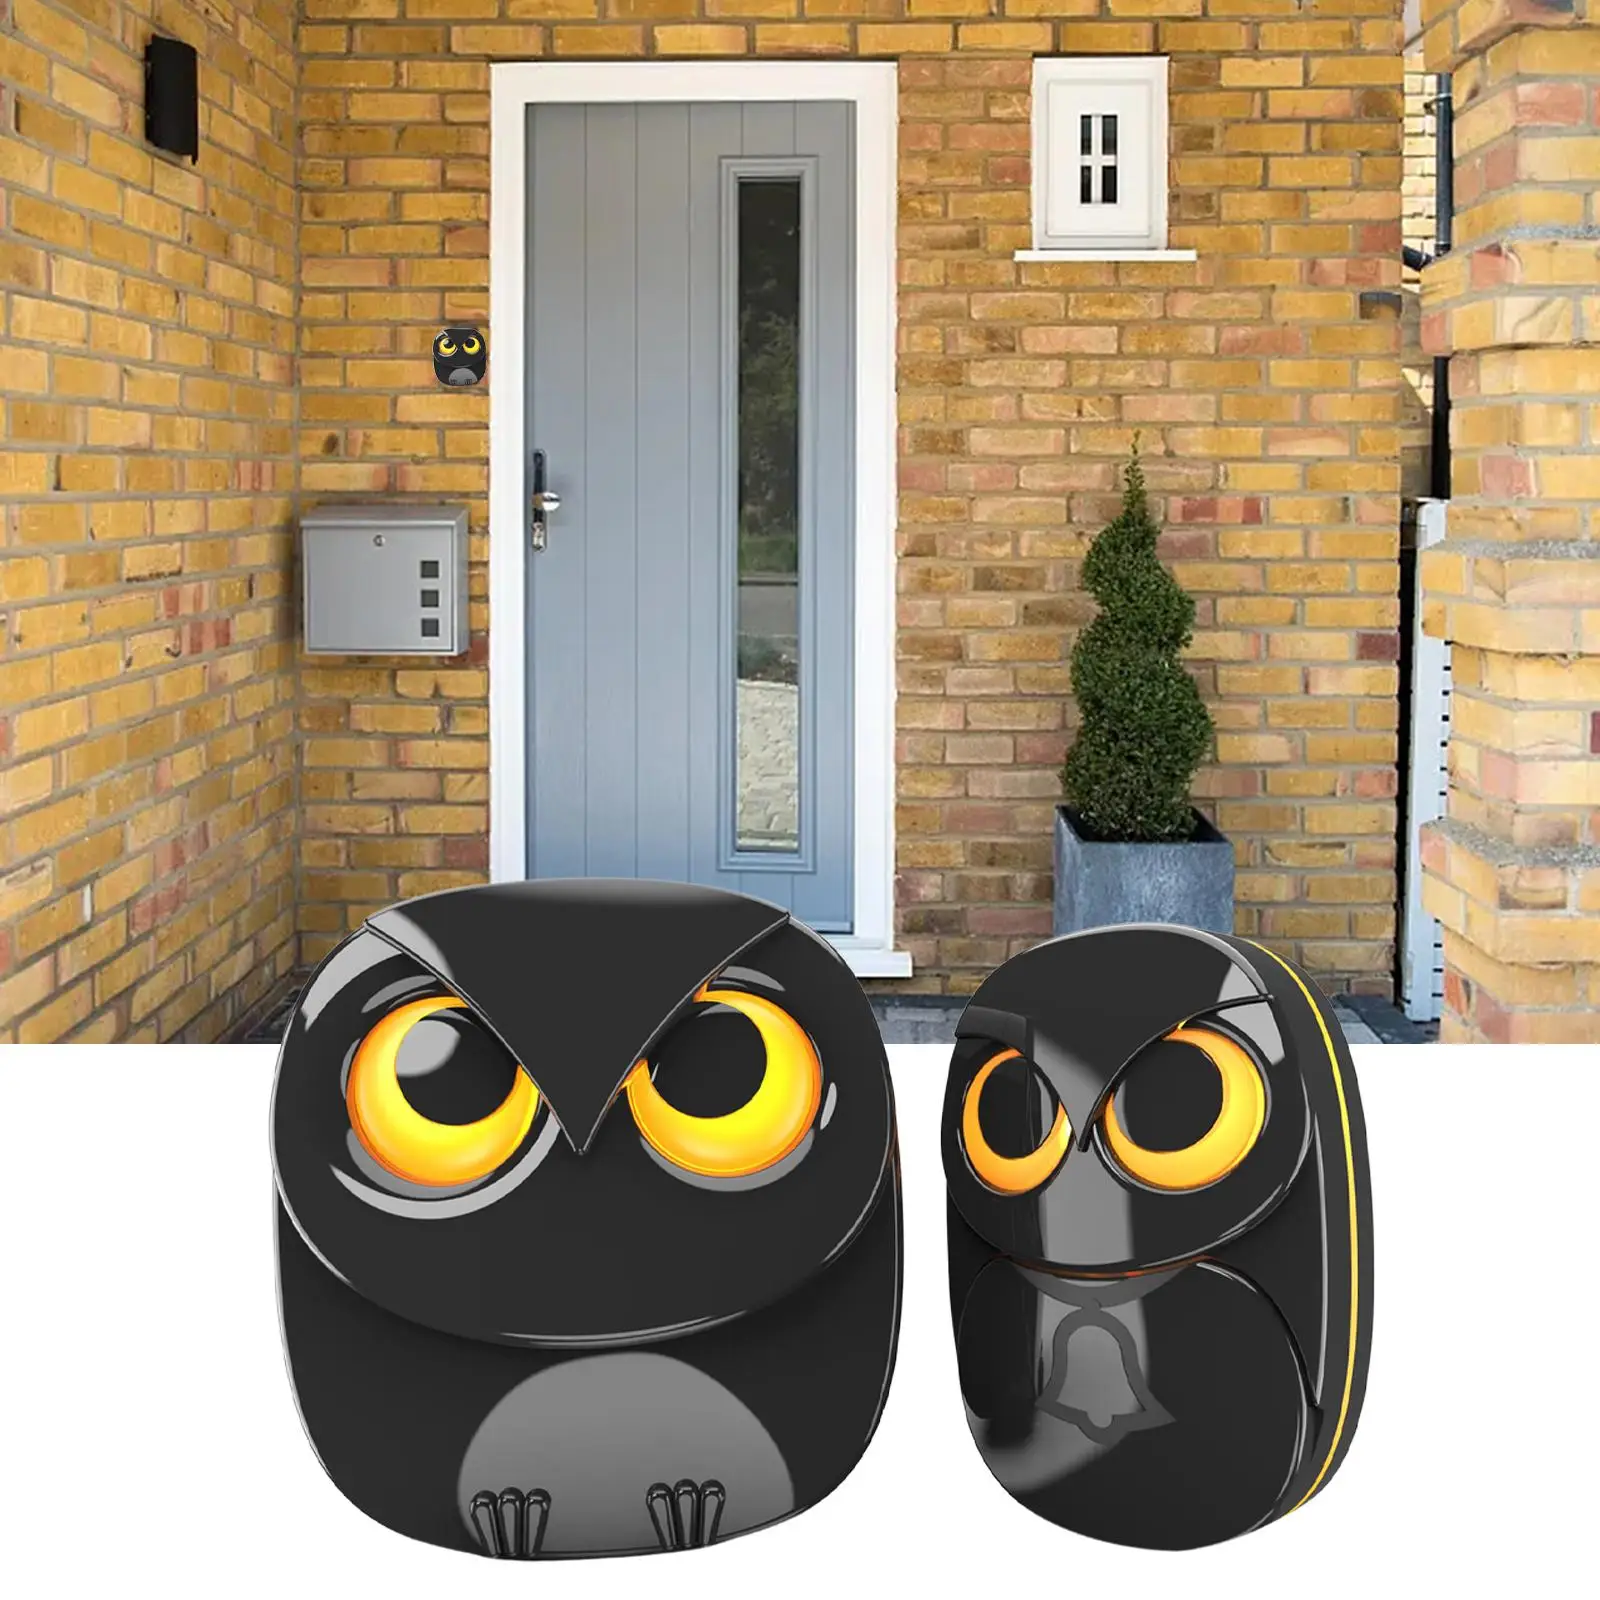 Wireless Driveway Security Alarm Durable Devices Multipurpose Simple to Use Doorbell for Garage Gate Outdoor Front Porch AU Plug